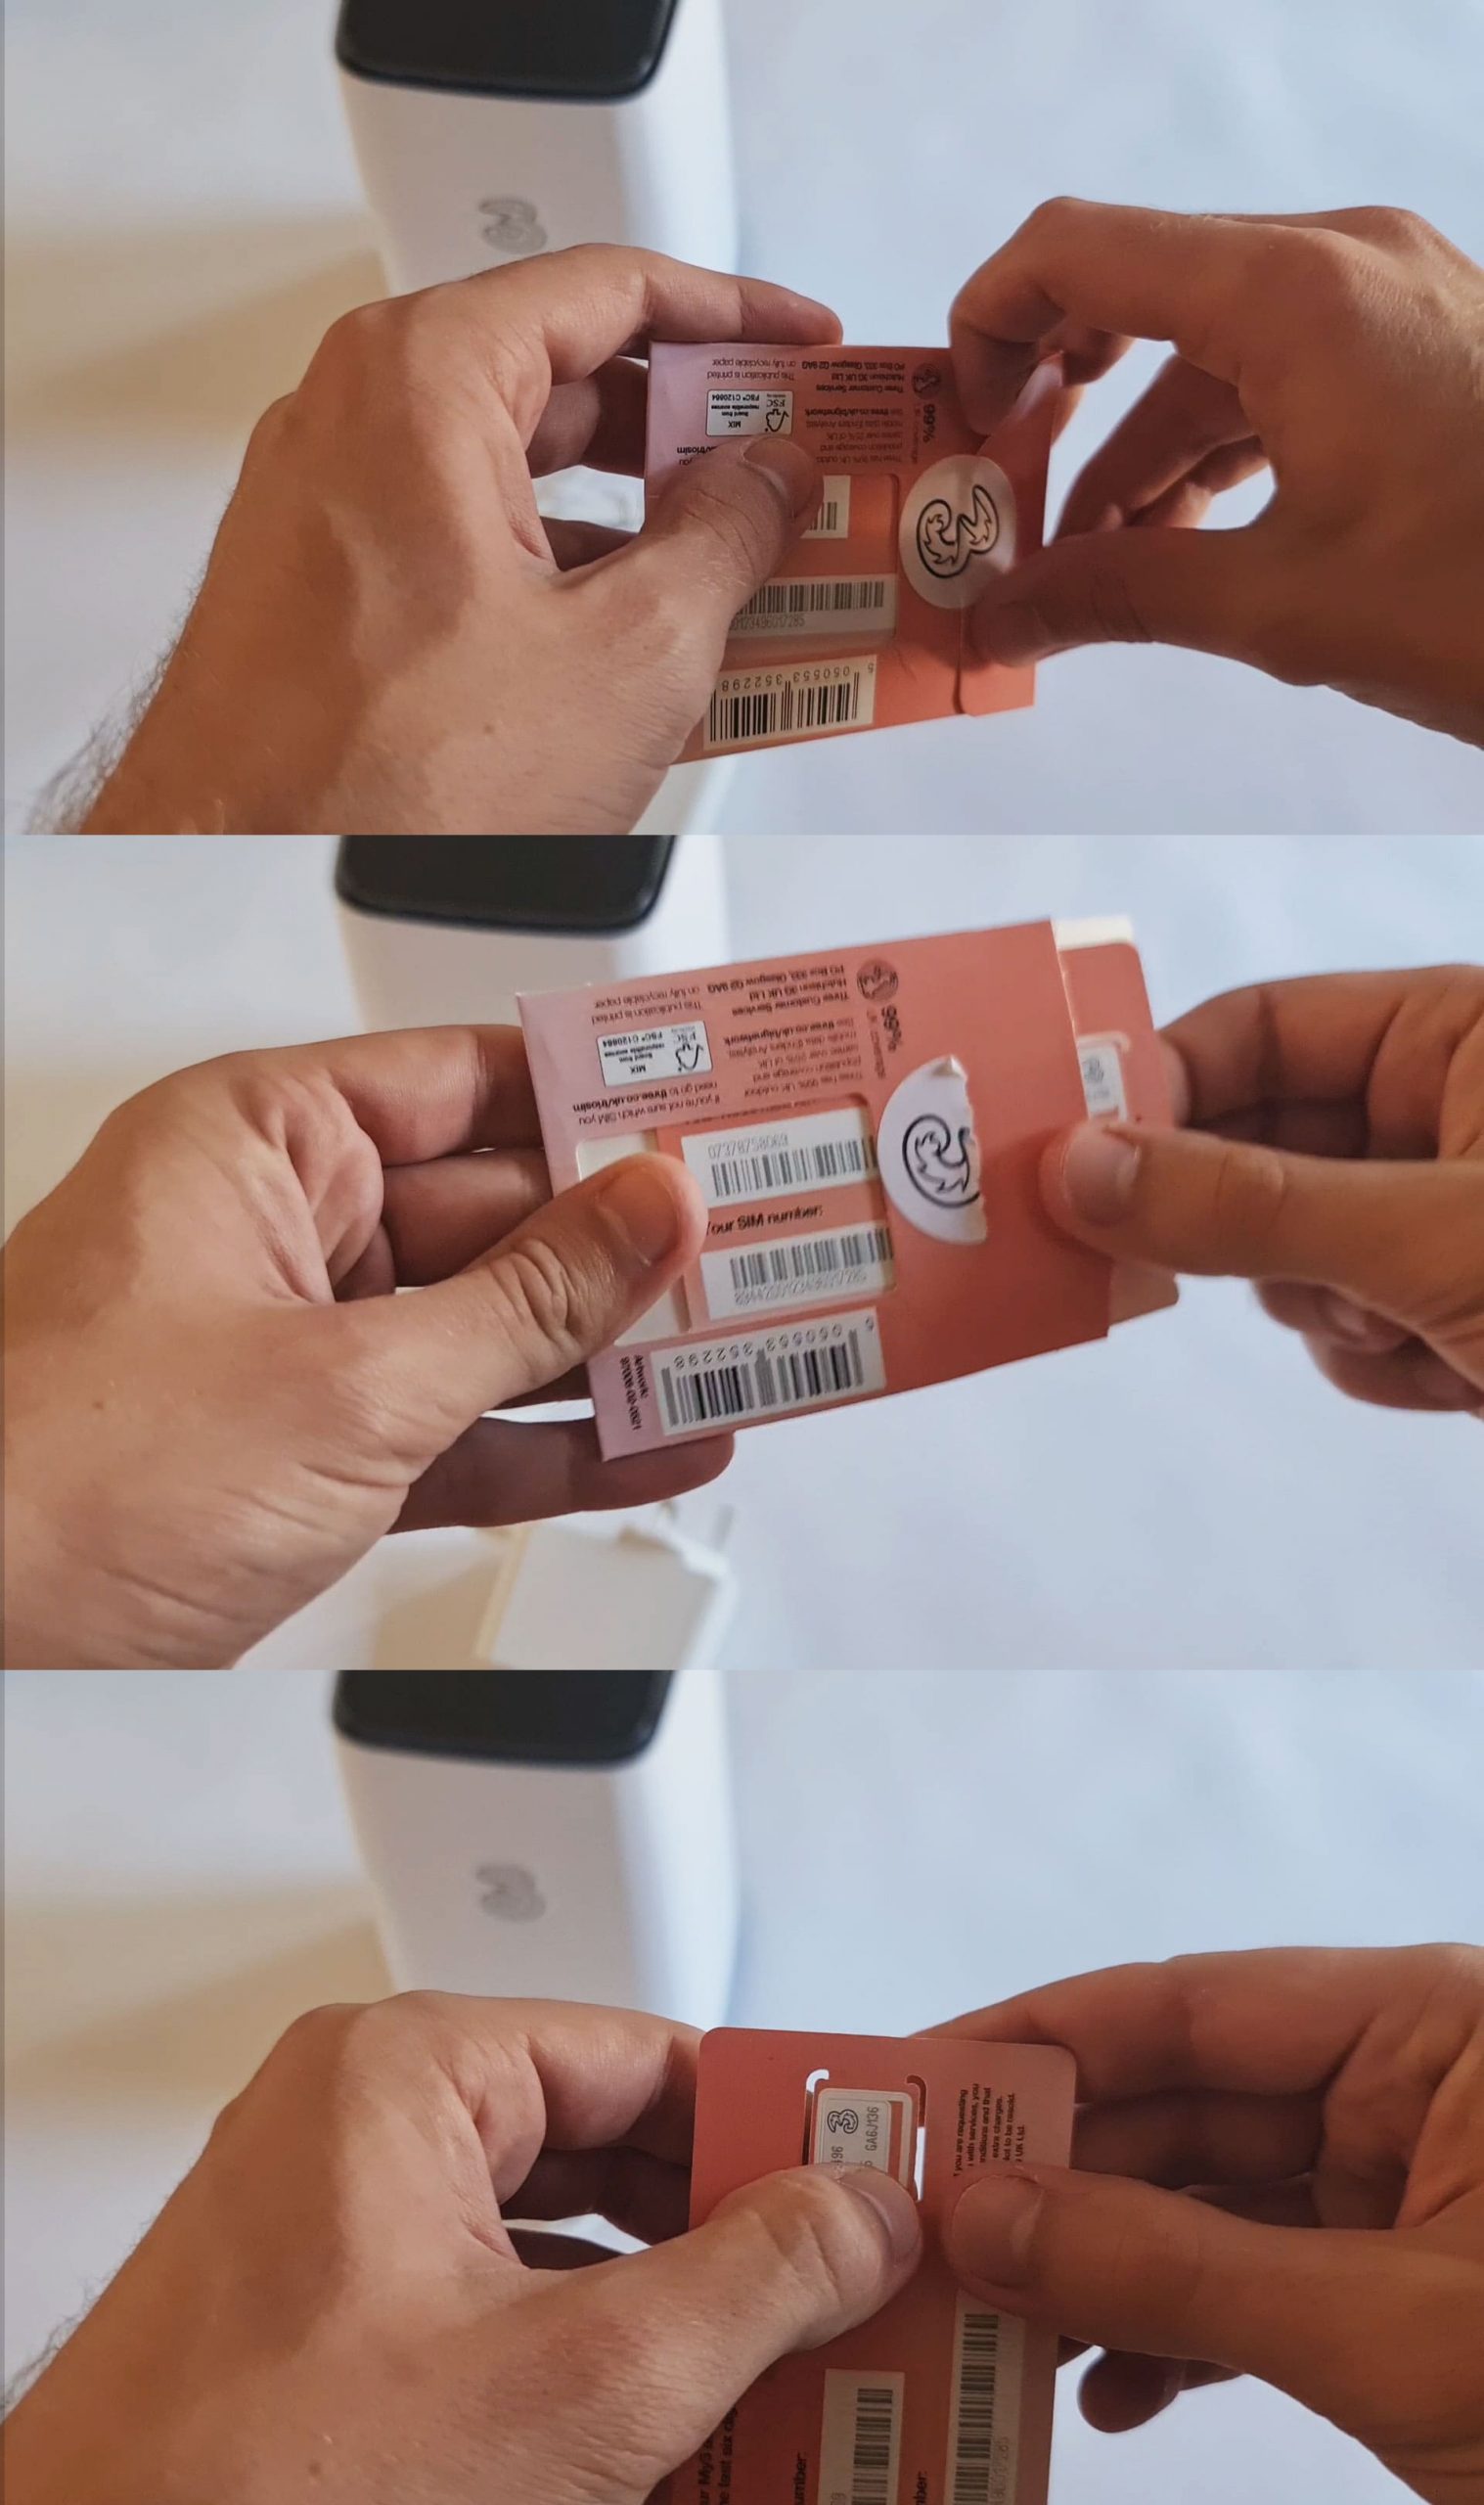 Removing the 5G SIM card from its packaging.